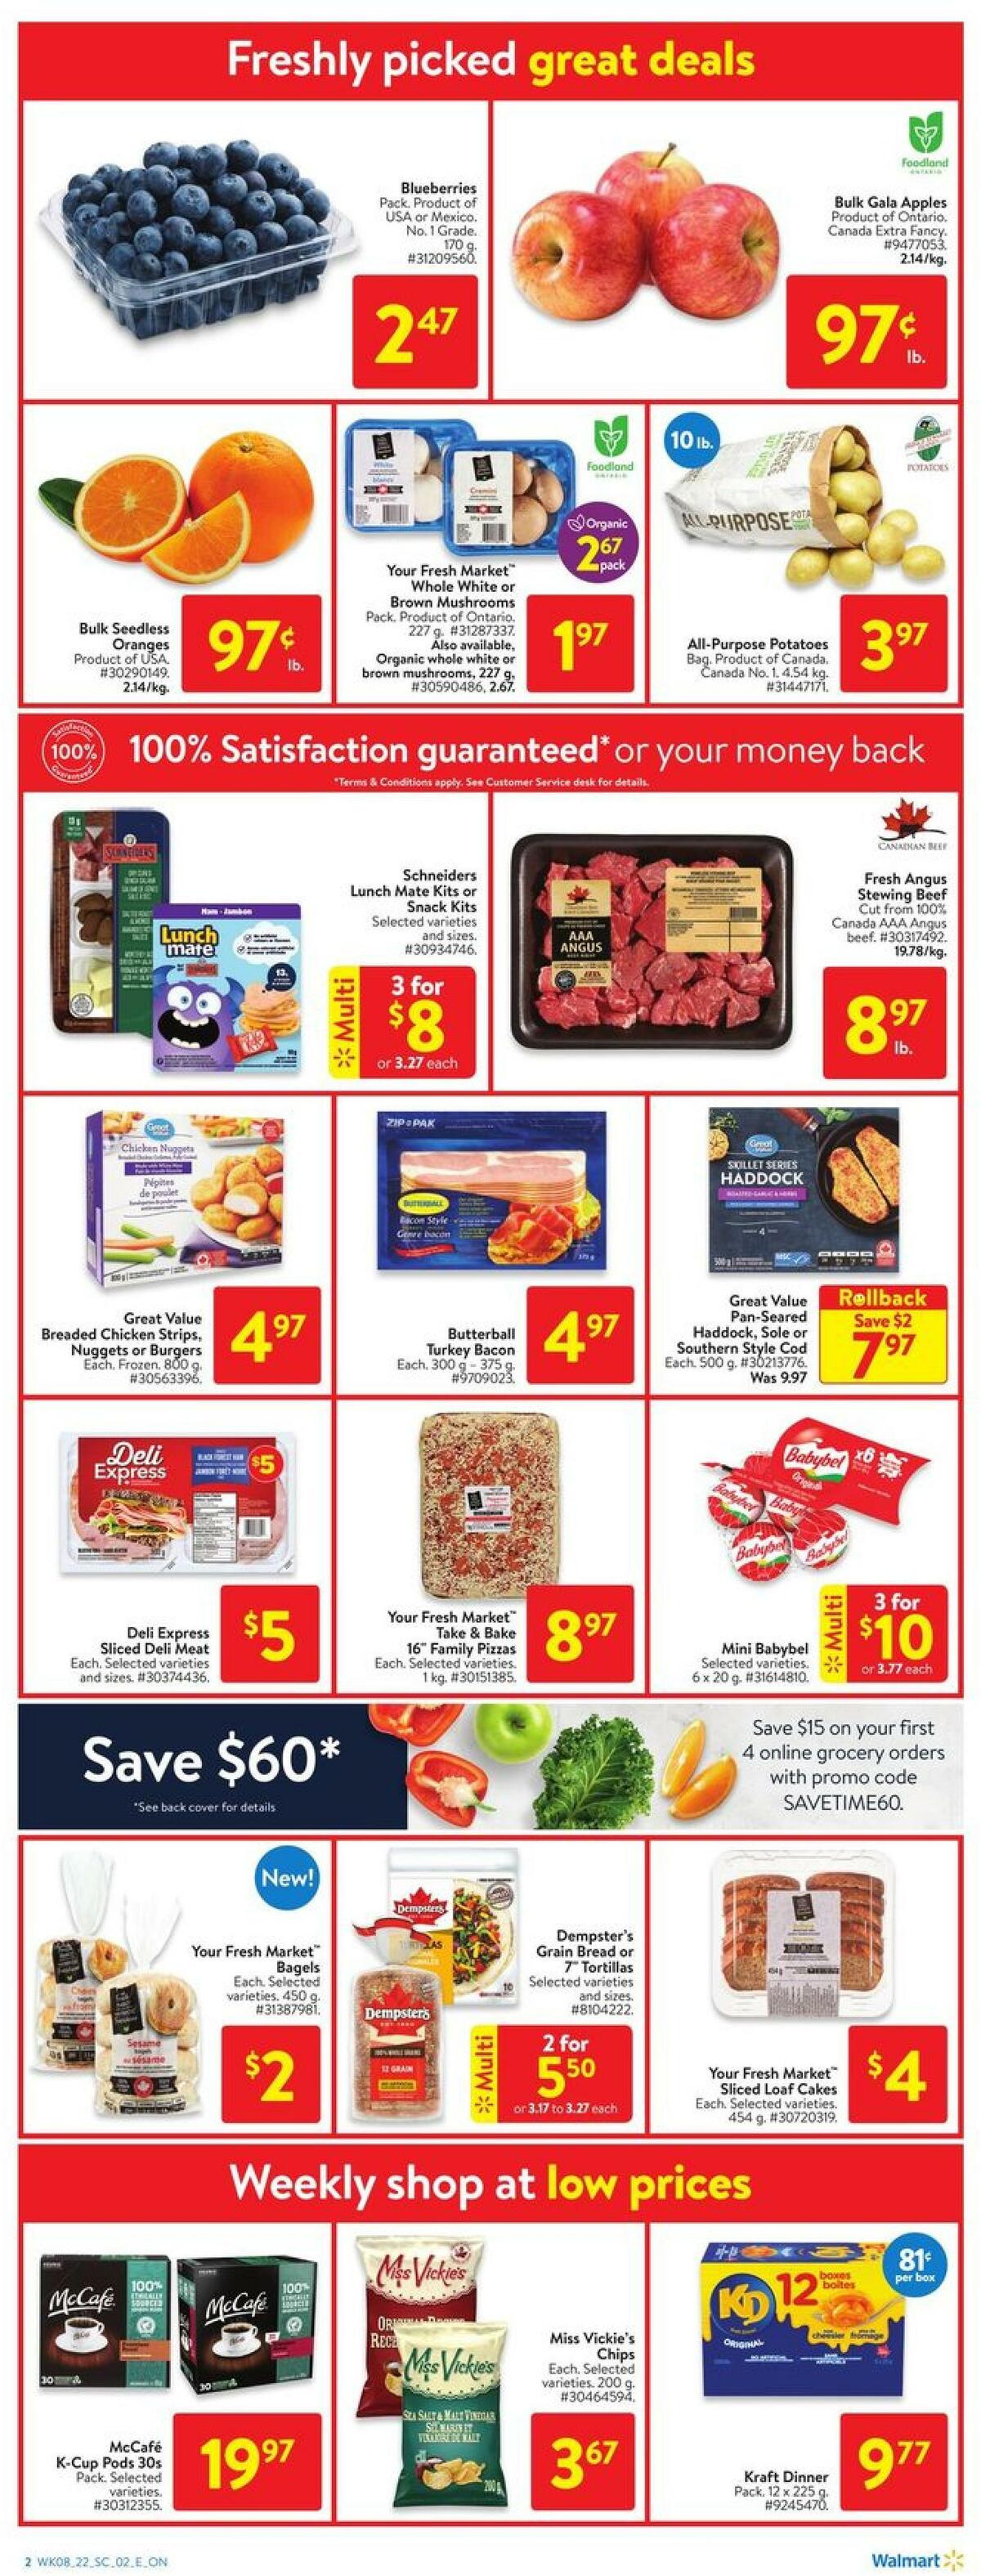 Walmart Flyer from March 17